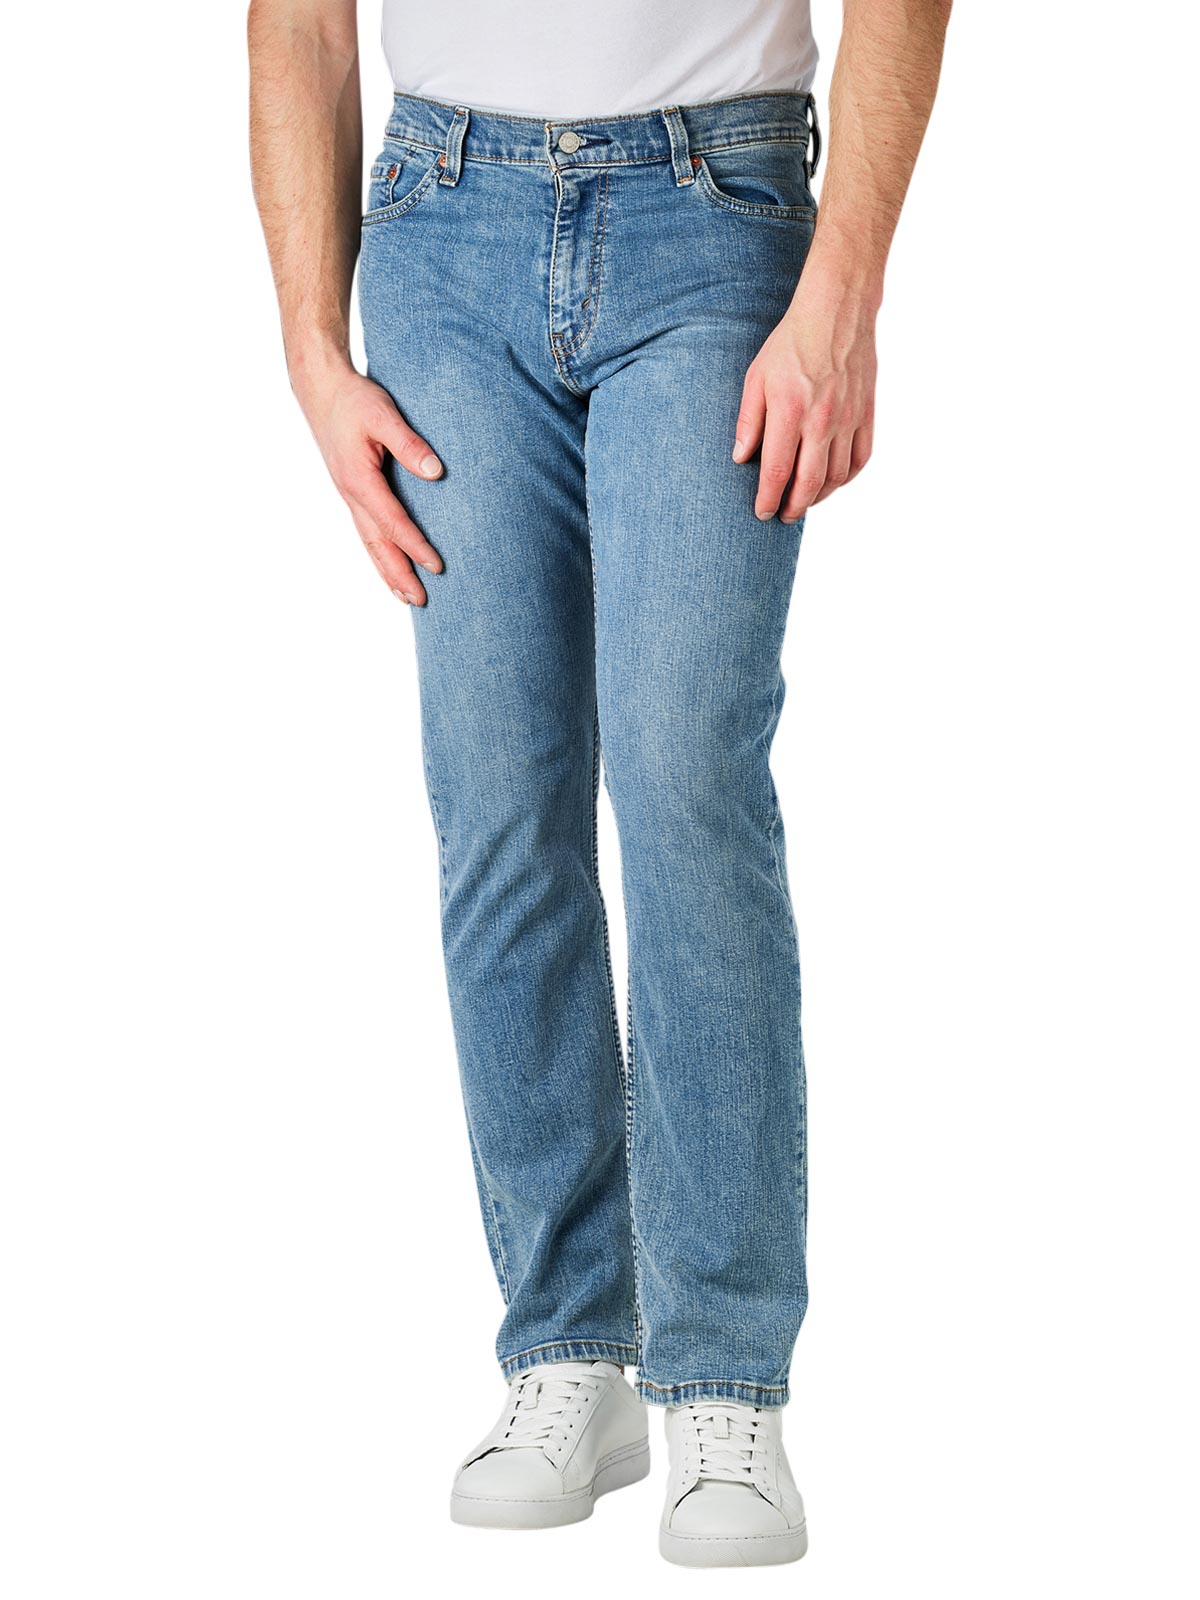 Levi's 511 Jeans Slim Fit Pickles Levi's Men's Jeans | Free Shipping on   - SIMPLY LOOK GOOD